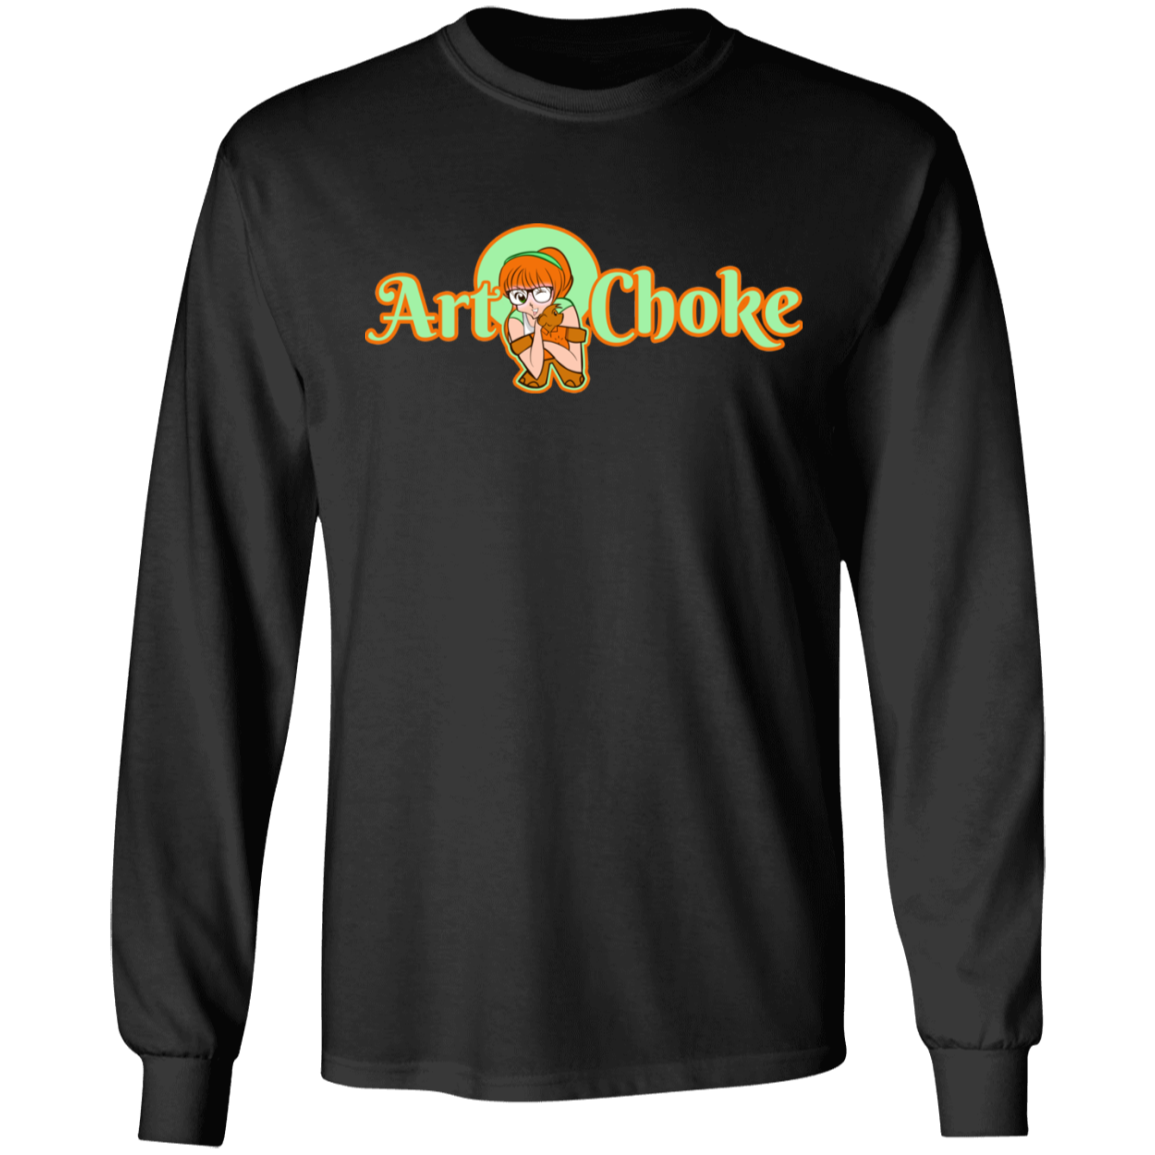 ArtichokeUSA Character and Font Design. Let’s Create Your Own Design Today. Winnie. Long Sleeve 100% Cotton T-Shirt